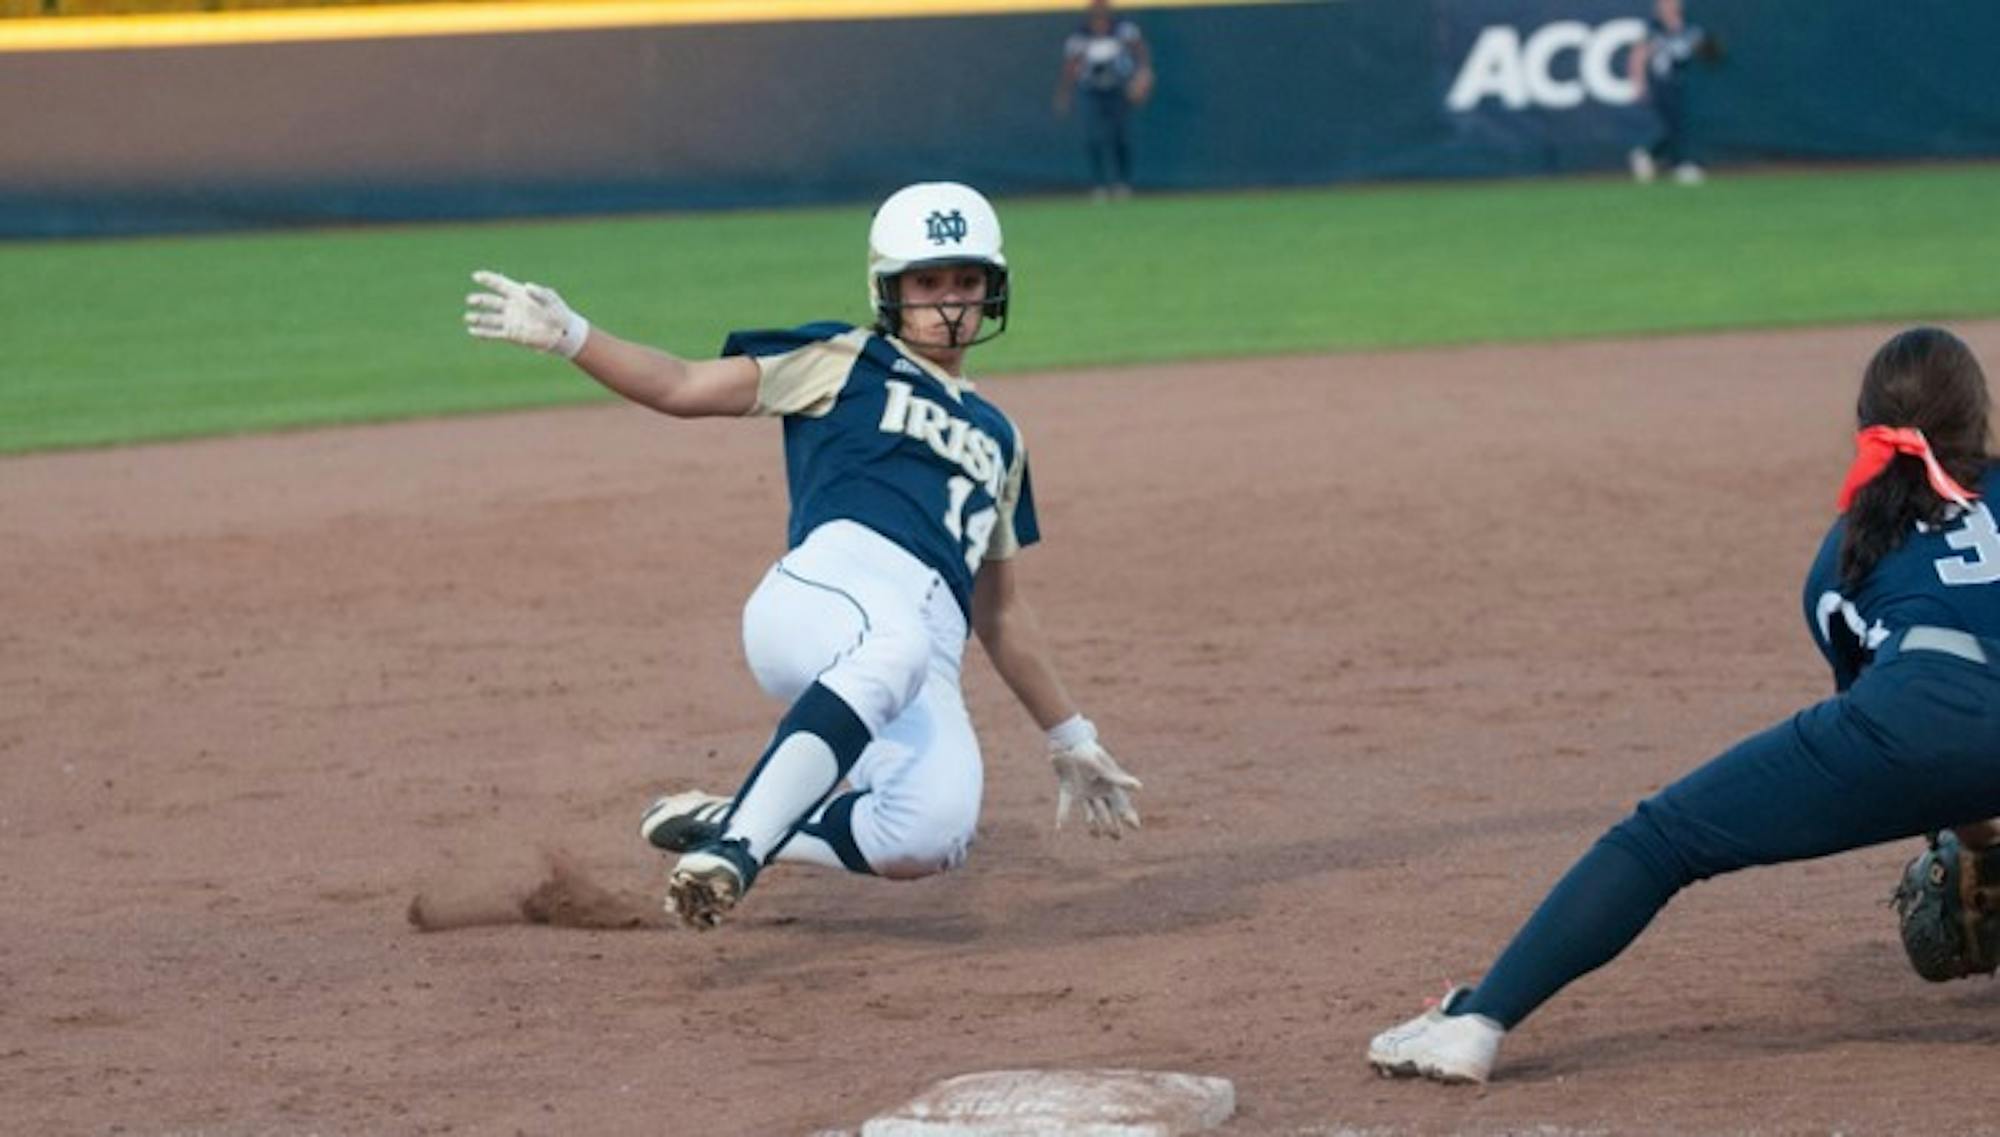 Senior outfielder Monica Torres slides into third base before the tag during a game on Oct. 9. Torres scored a run during Notre Dame's 9-5 win over Virginia Tech on Sunday.